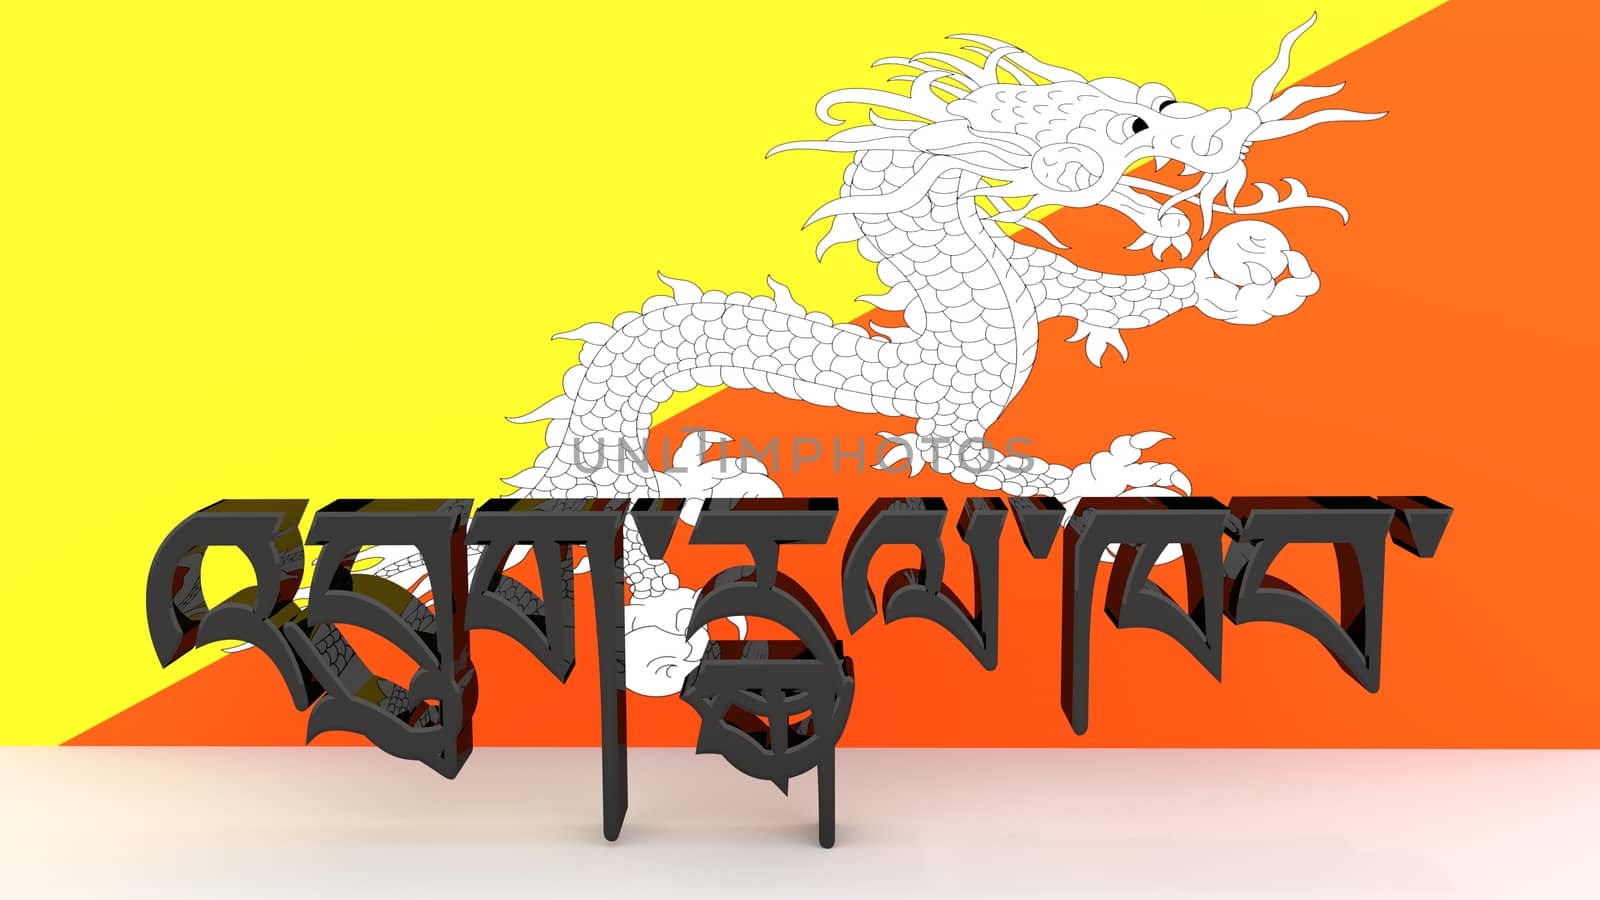 Dzongkha characters made of dark metal meaning Bhutan in front of an bhutanese flag. Dzongkha is the national language of Bhutan.